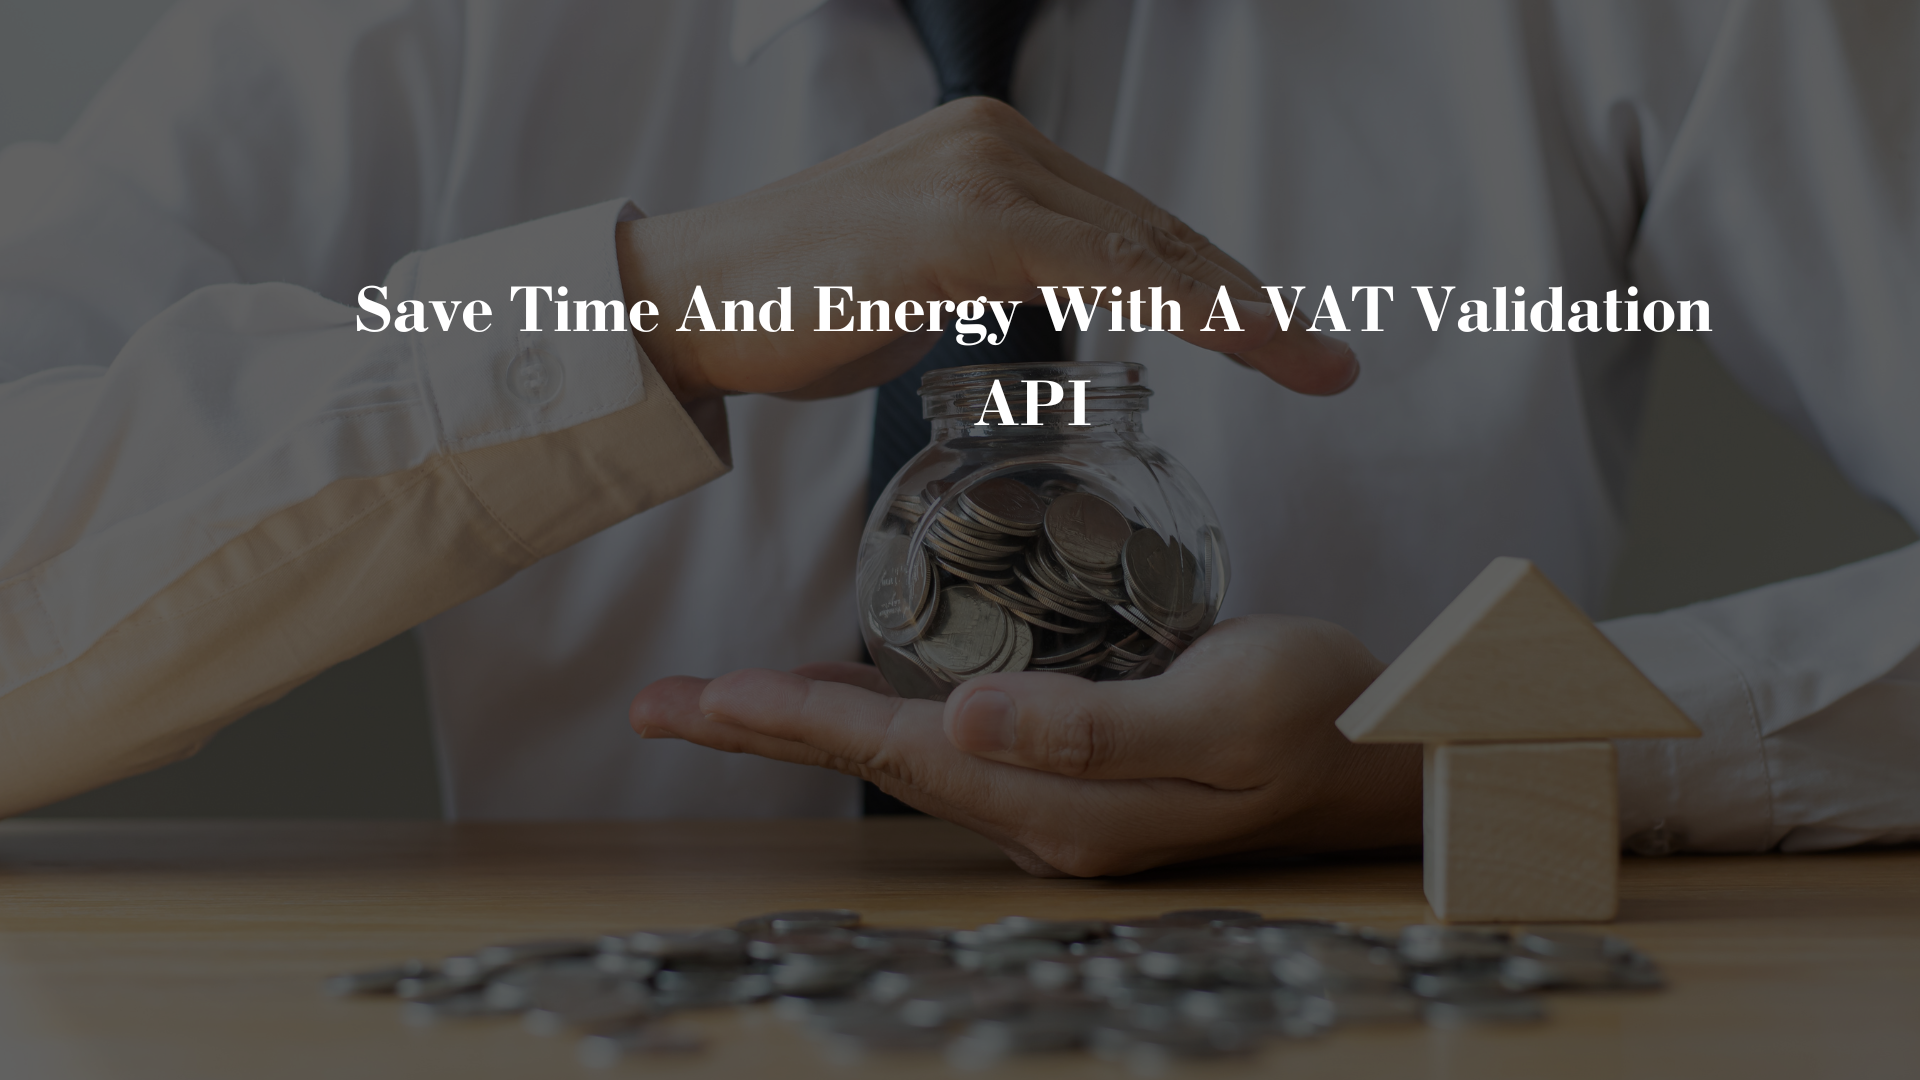 Save Time And Energy With A VAT Validation API